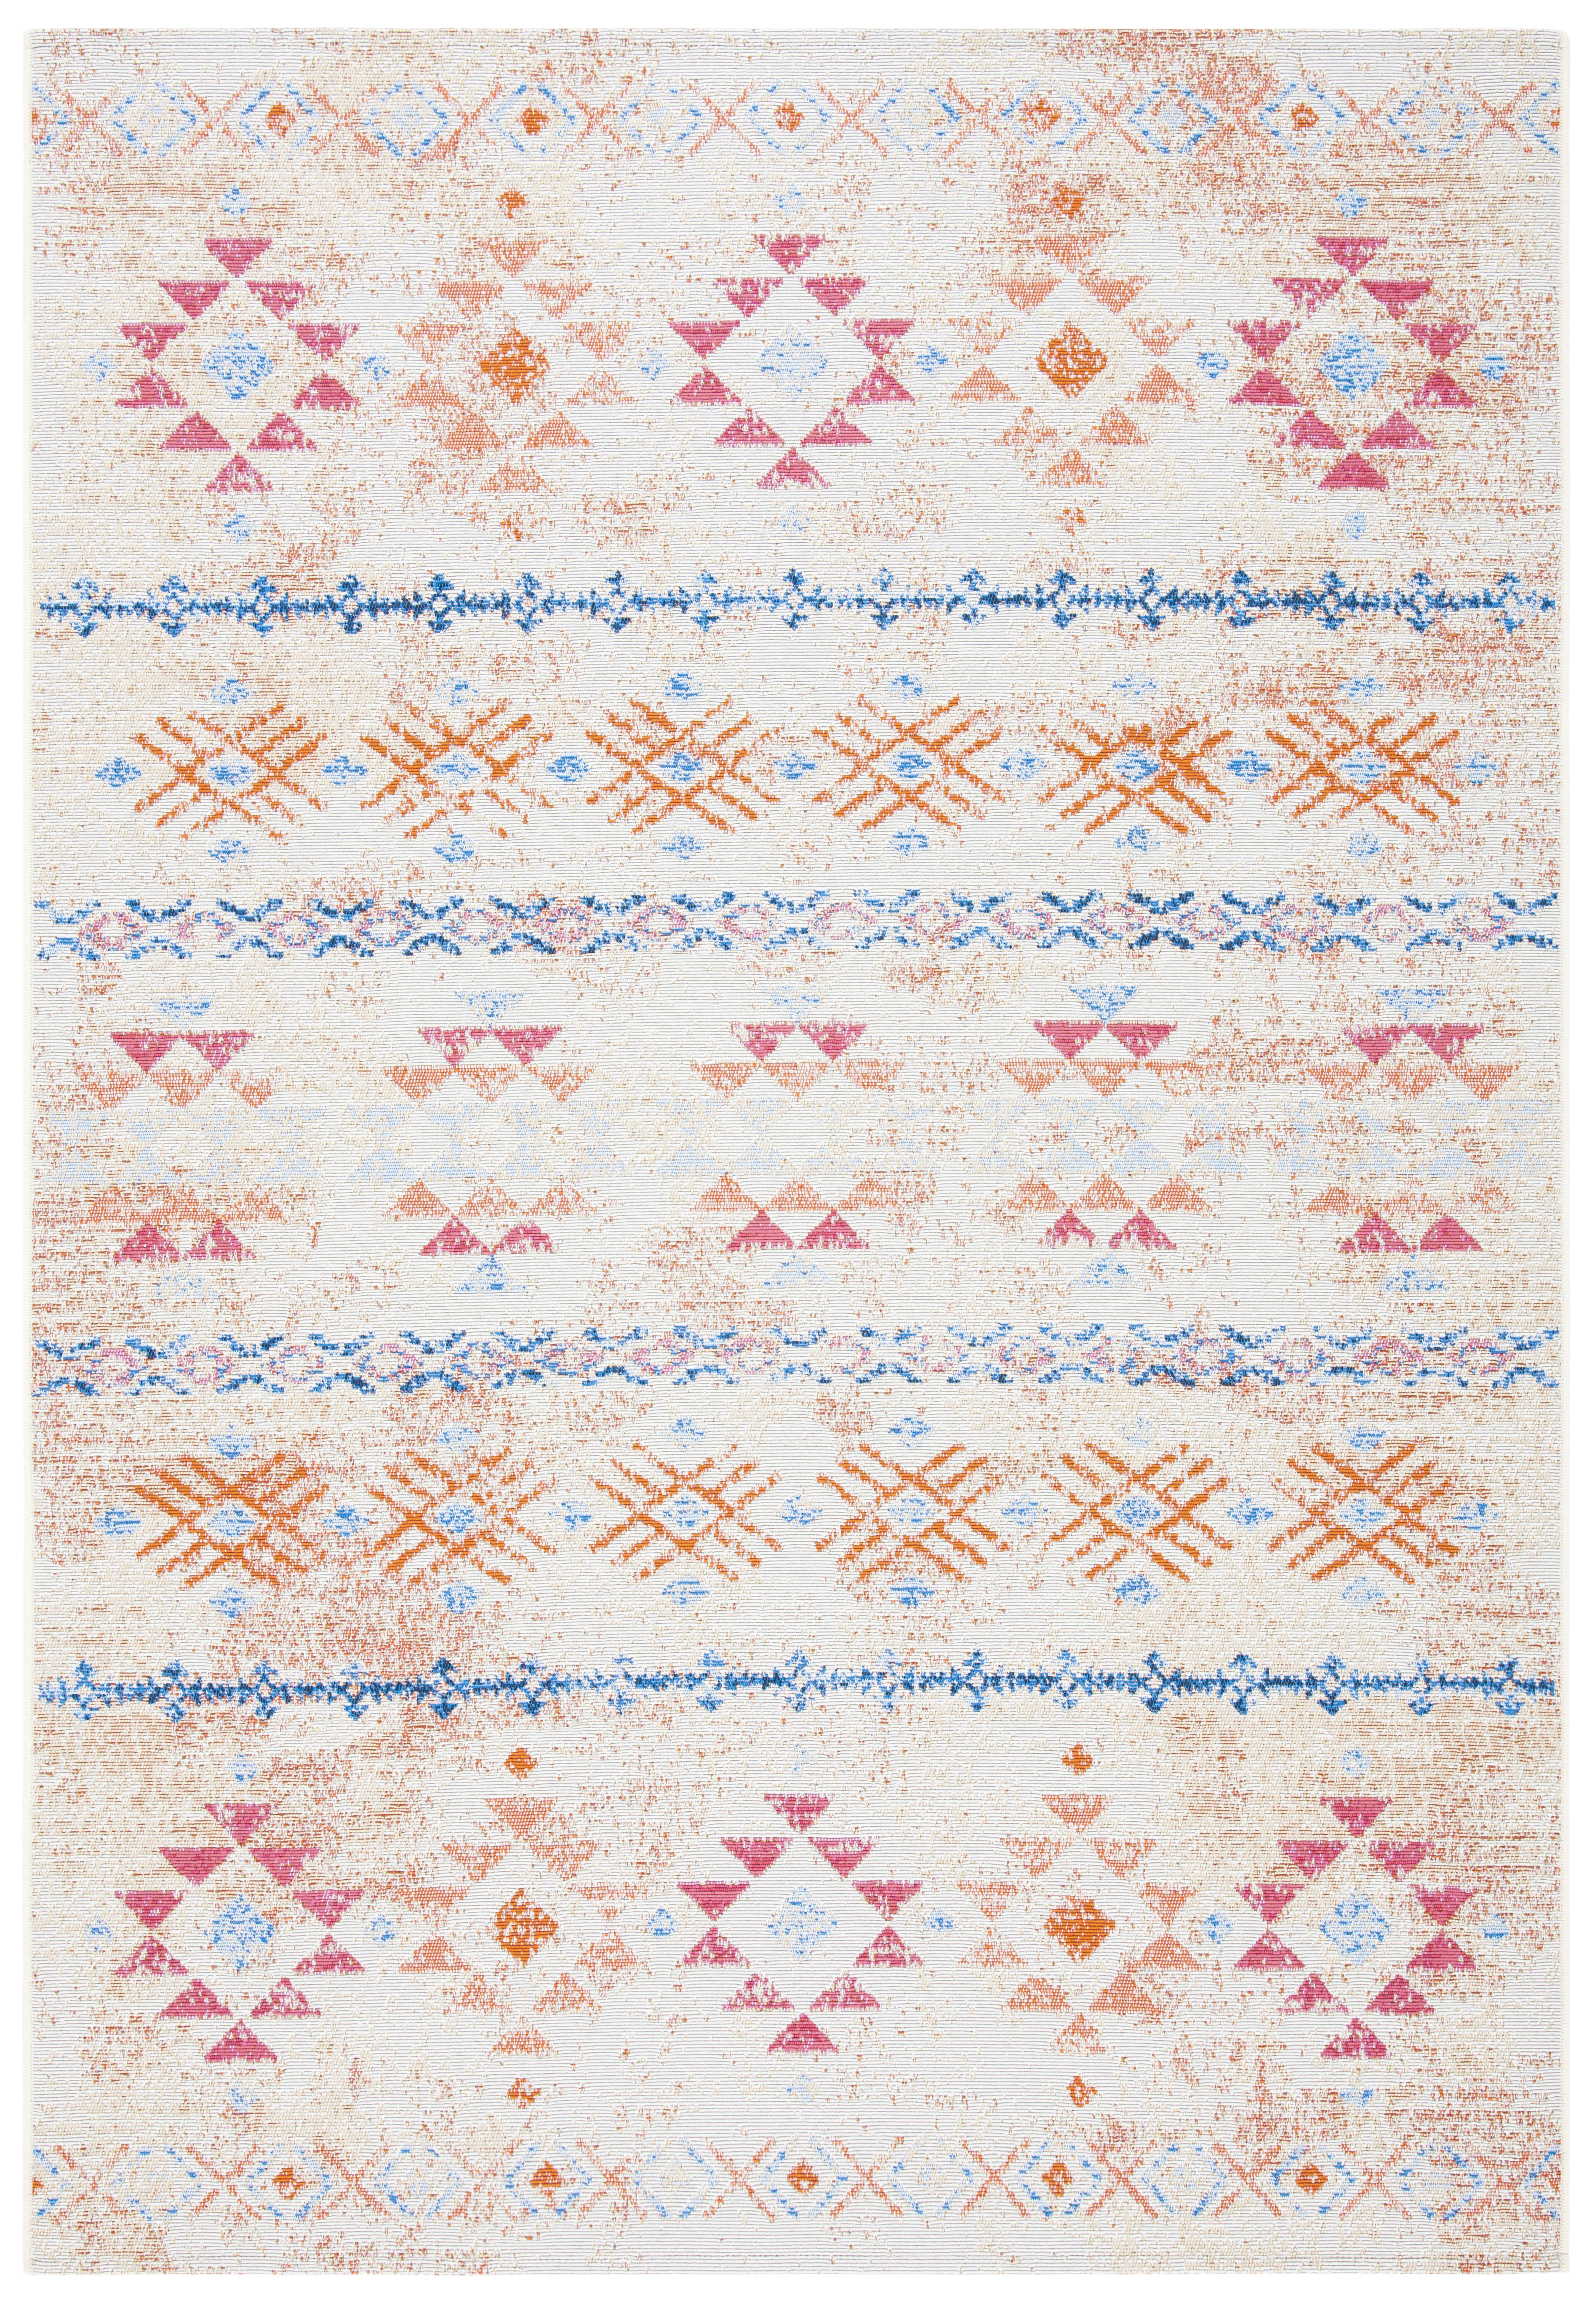 Safavieh Summer Donella Outdoor Boho Distressed Area Rug, Ivory/Red, 8' x 10'5" - image 2 of 6